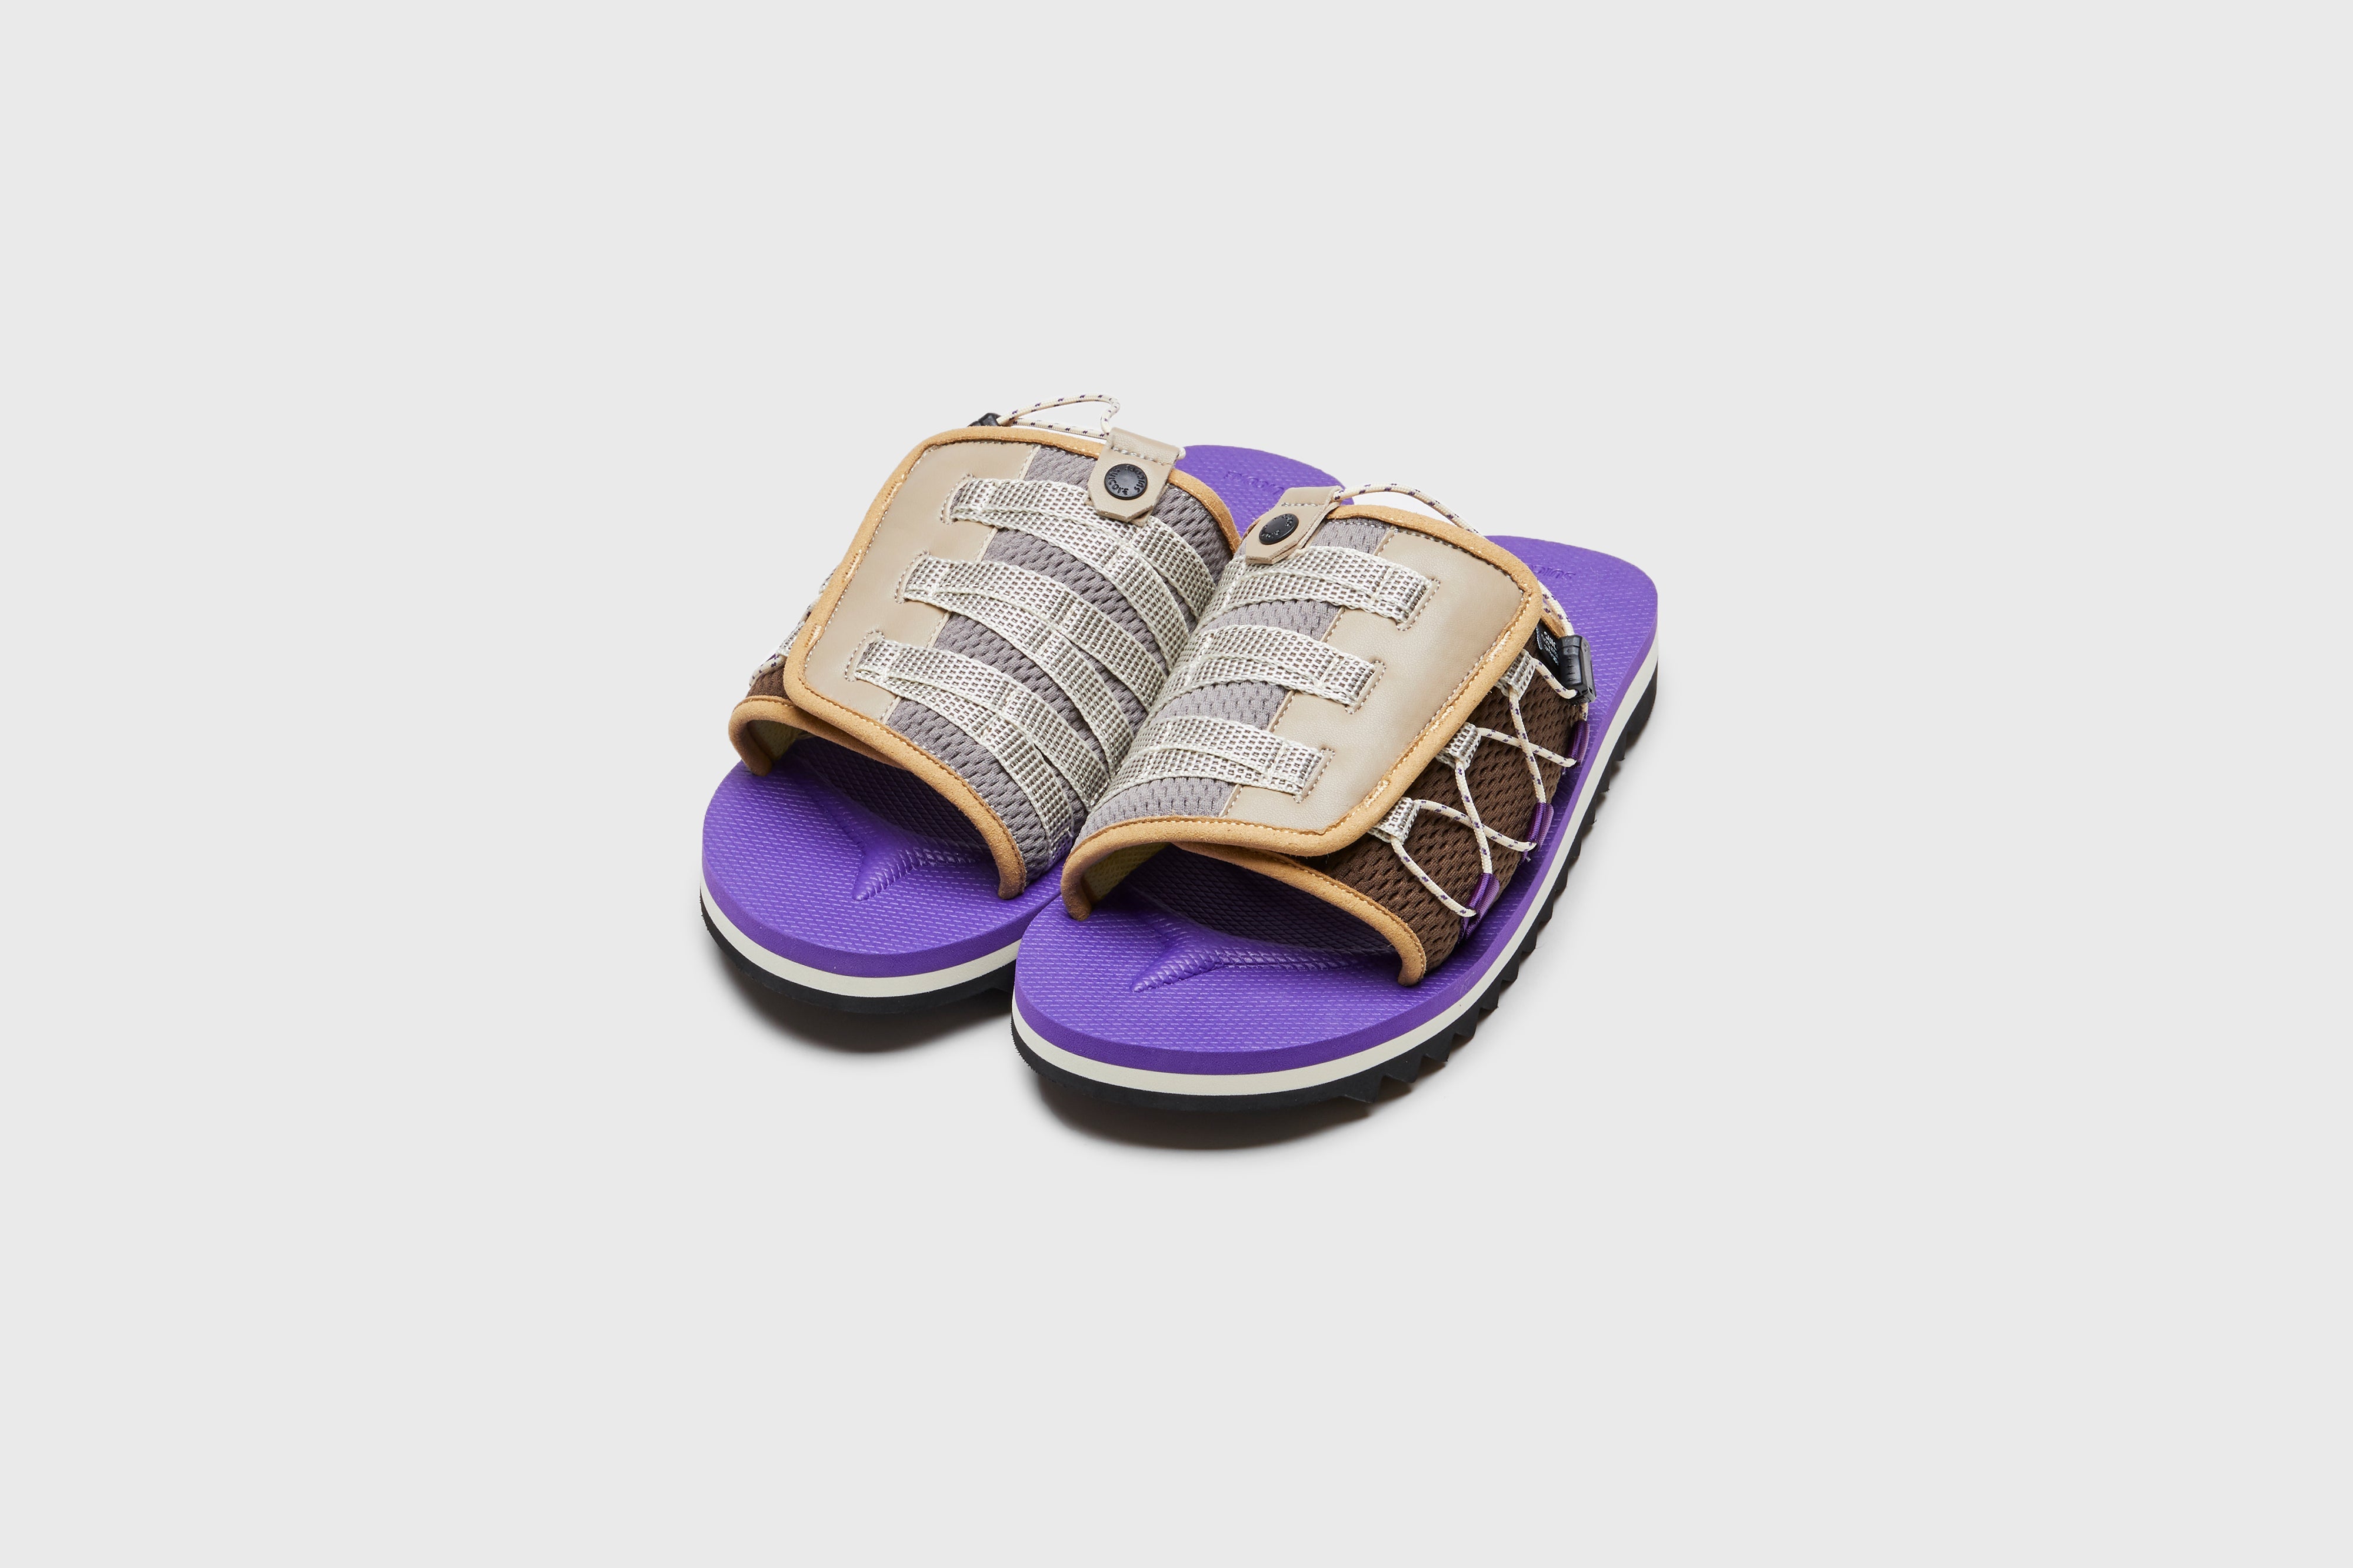 SUICOKE DAO-2AB slides with brown & purple nylon upper, brown & purple midsole and sole, strap and logo patch. From Spring/Summer 2023 collection on eightywingold Web Store, an official partner of SUICOKE. OG-195-2AB BROWN X PURPLE